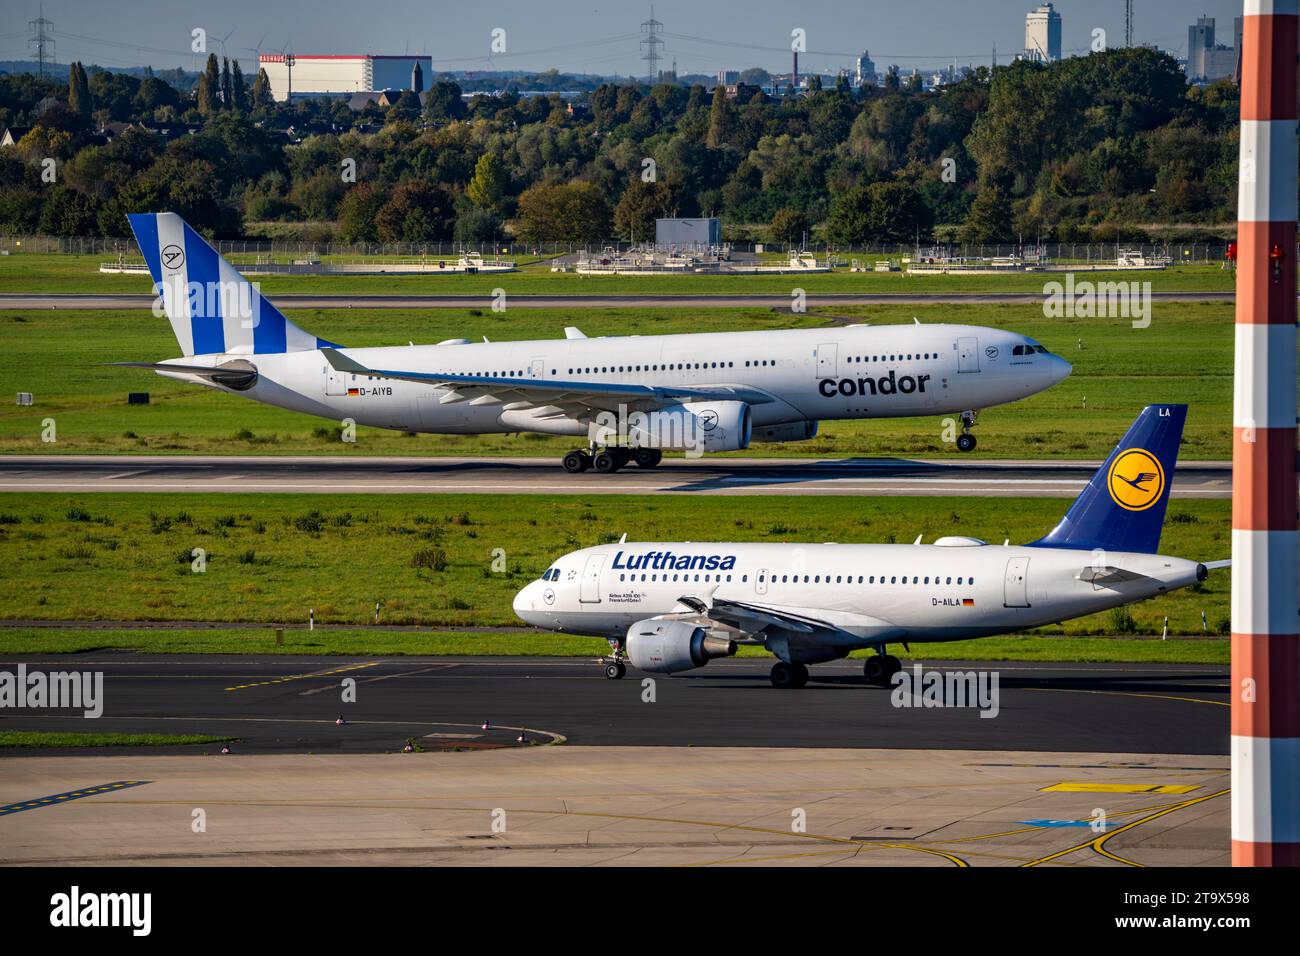 Düsseldorf Airport, NRW, Condor Airbus A330-200 on take-off, Lufthansa Airbus A310-100 on the taxiway, Stock Photo